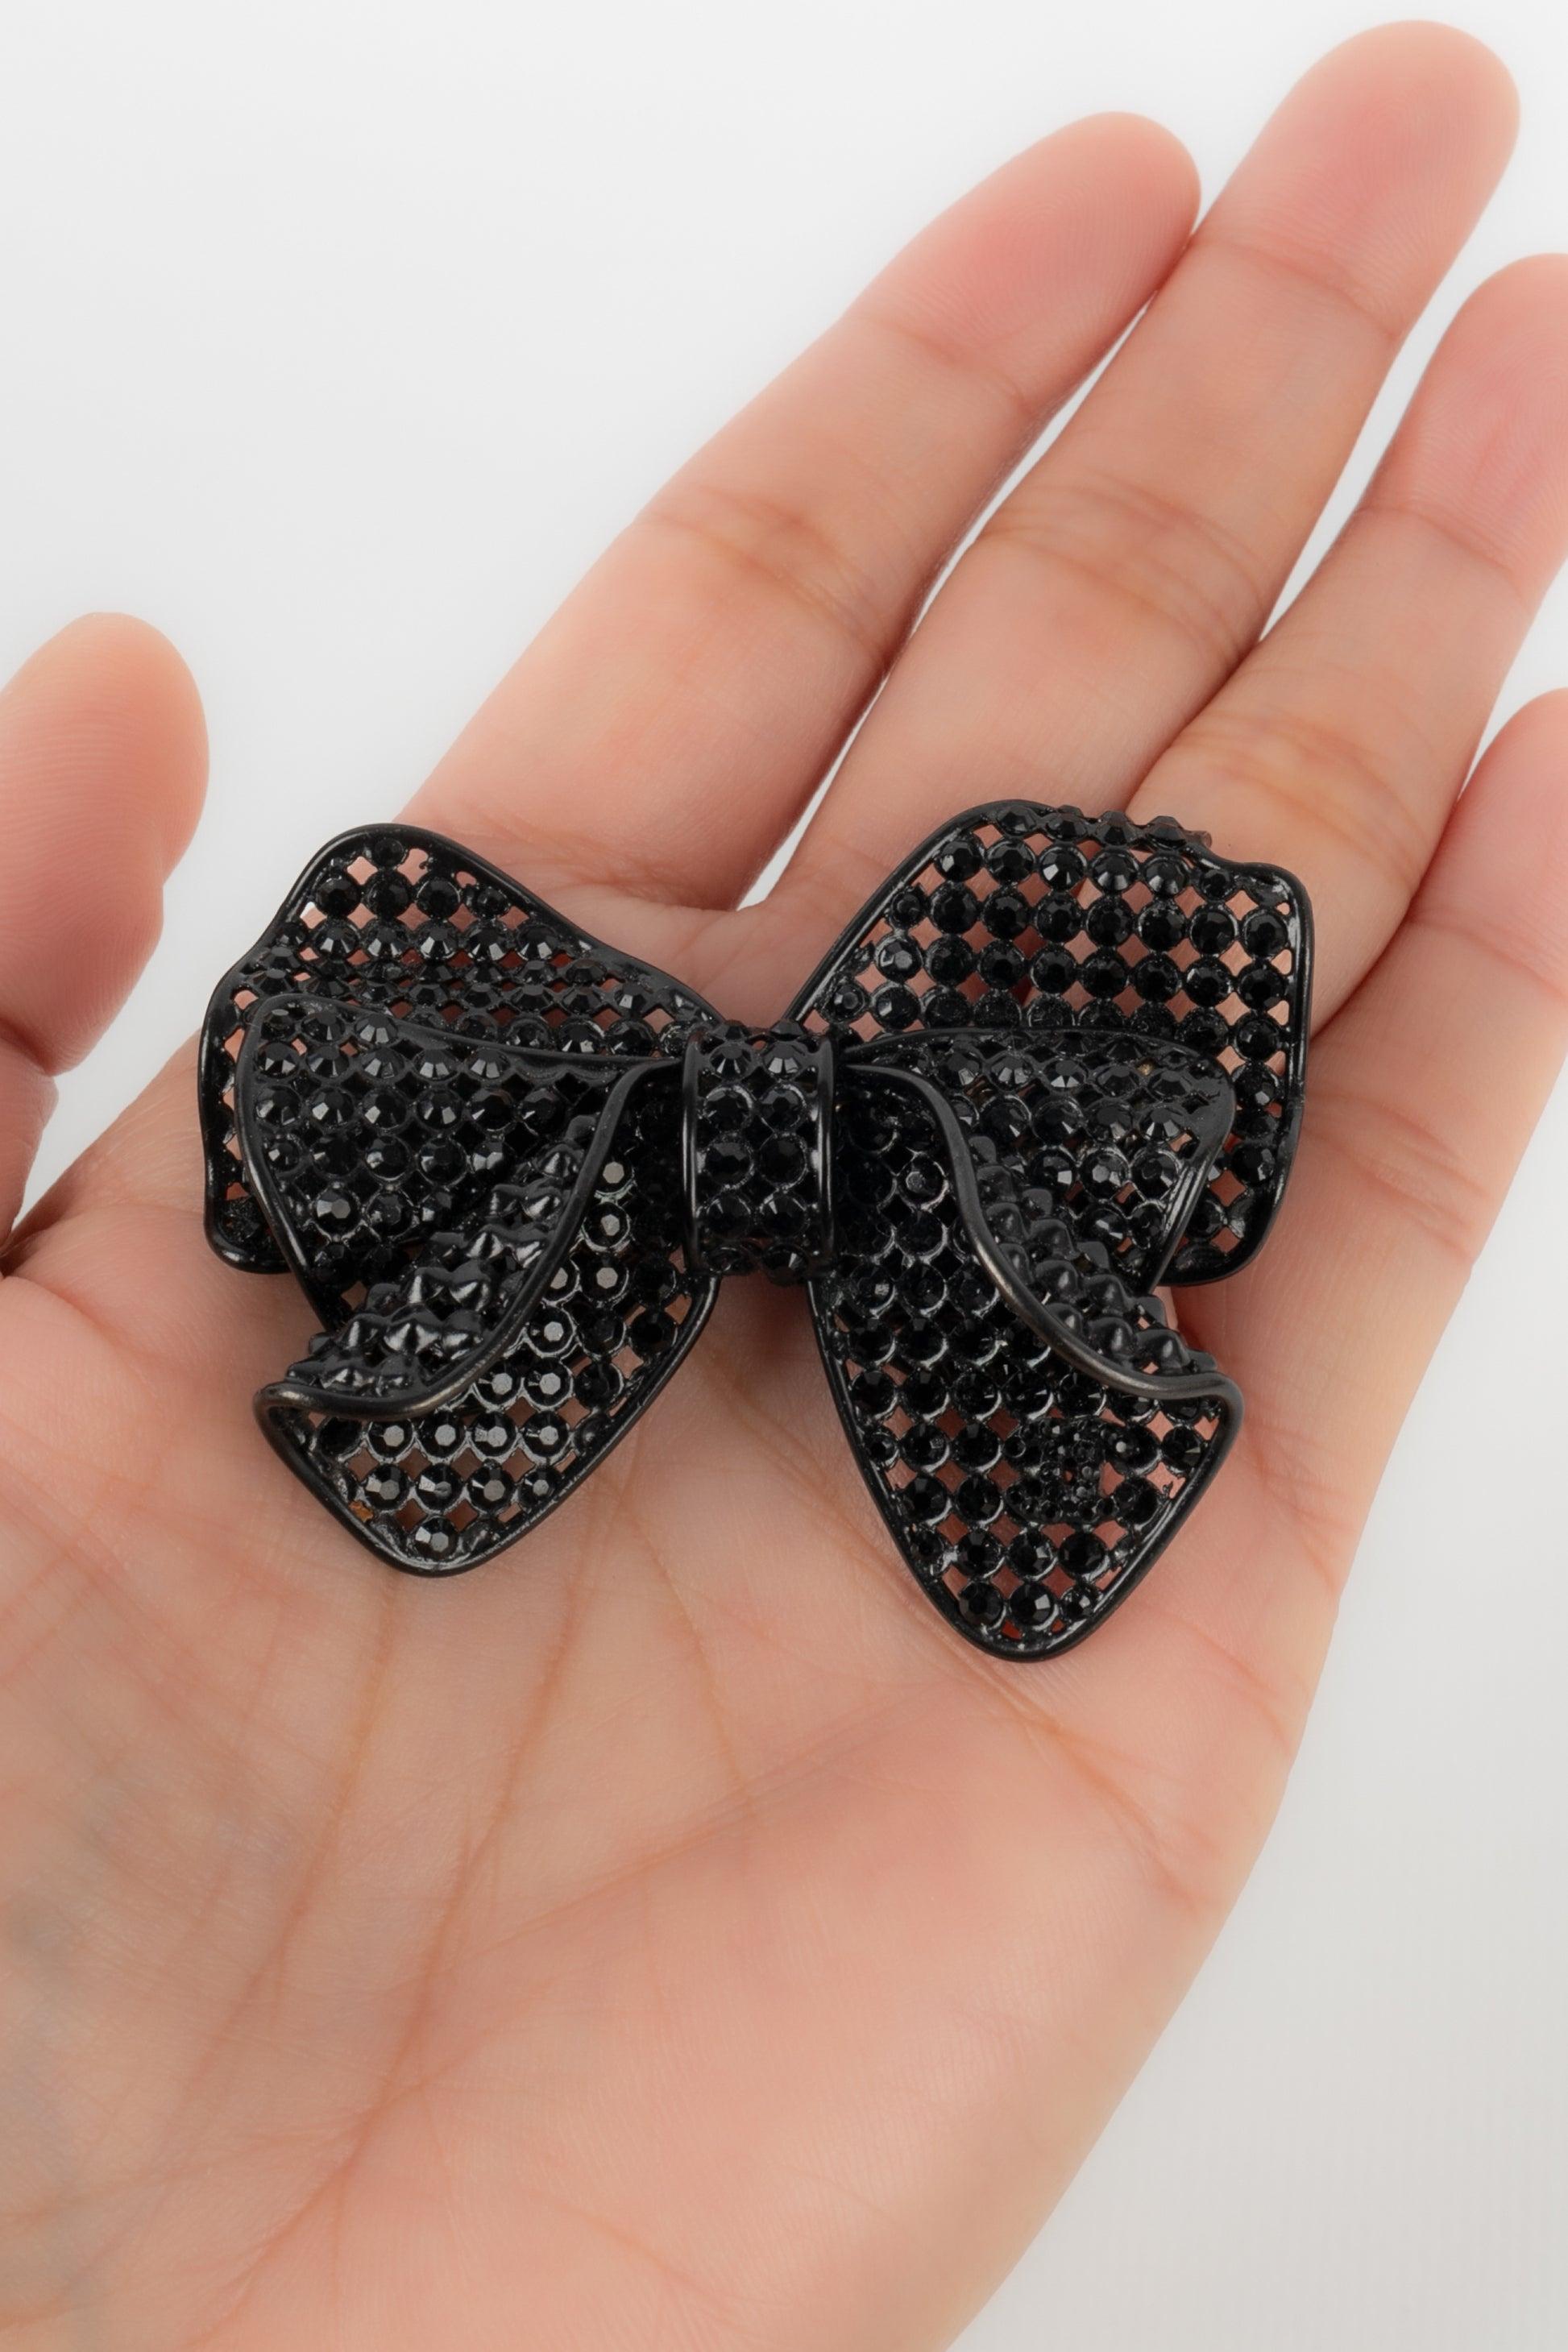 Chanel Bow Brooch in Black Metal with Black Rhinestones, 2009 For Sale 2